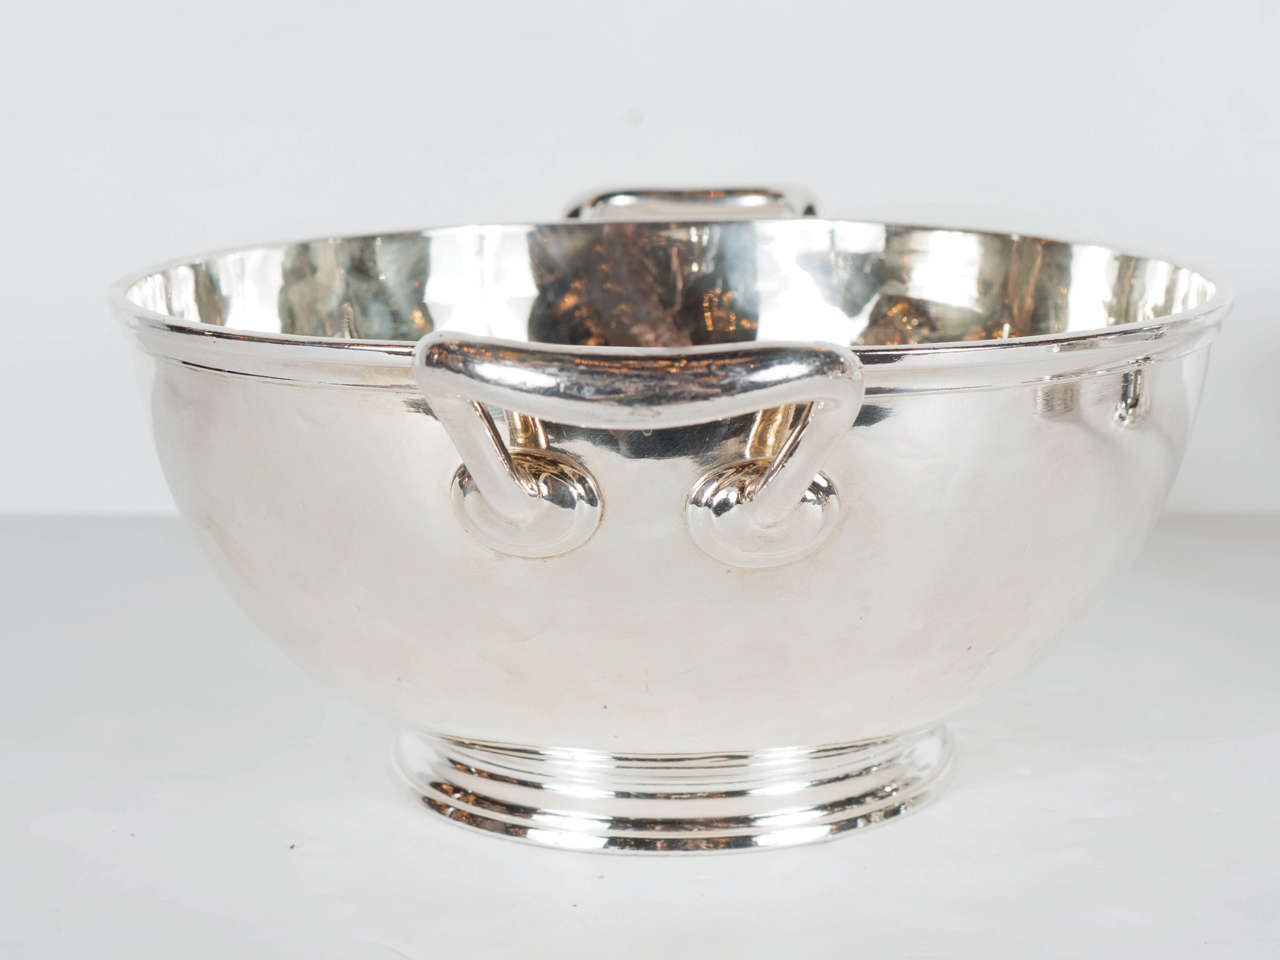 Gorgeous Art Deco Silver Plate and Gilt Bowl by Maison Christofle 1